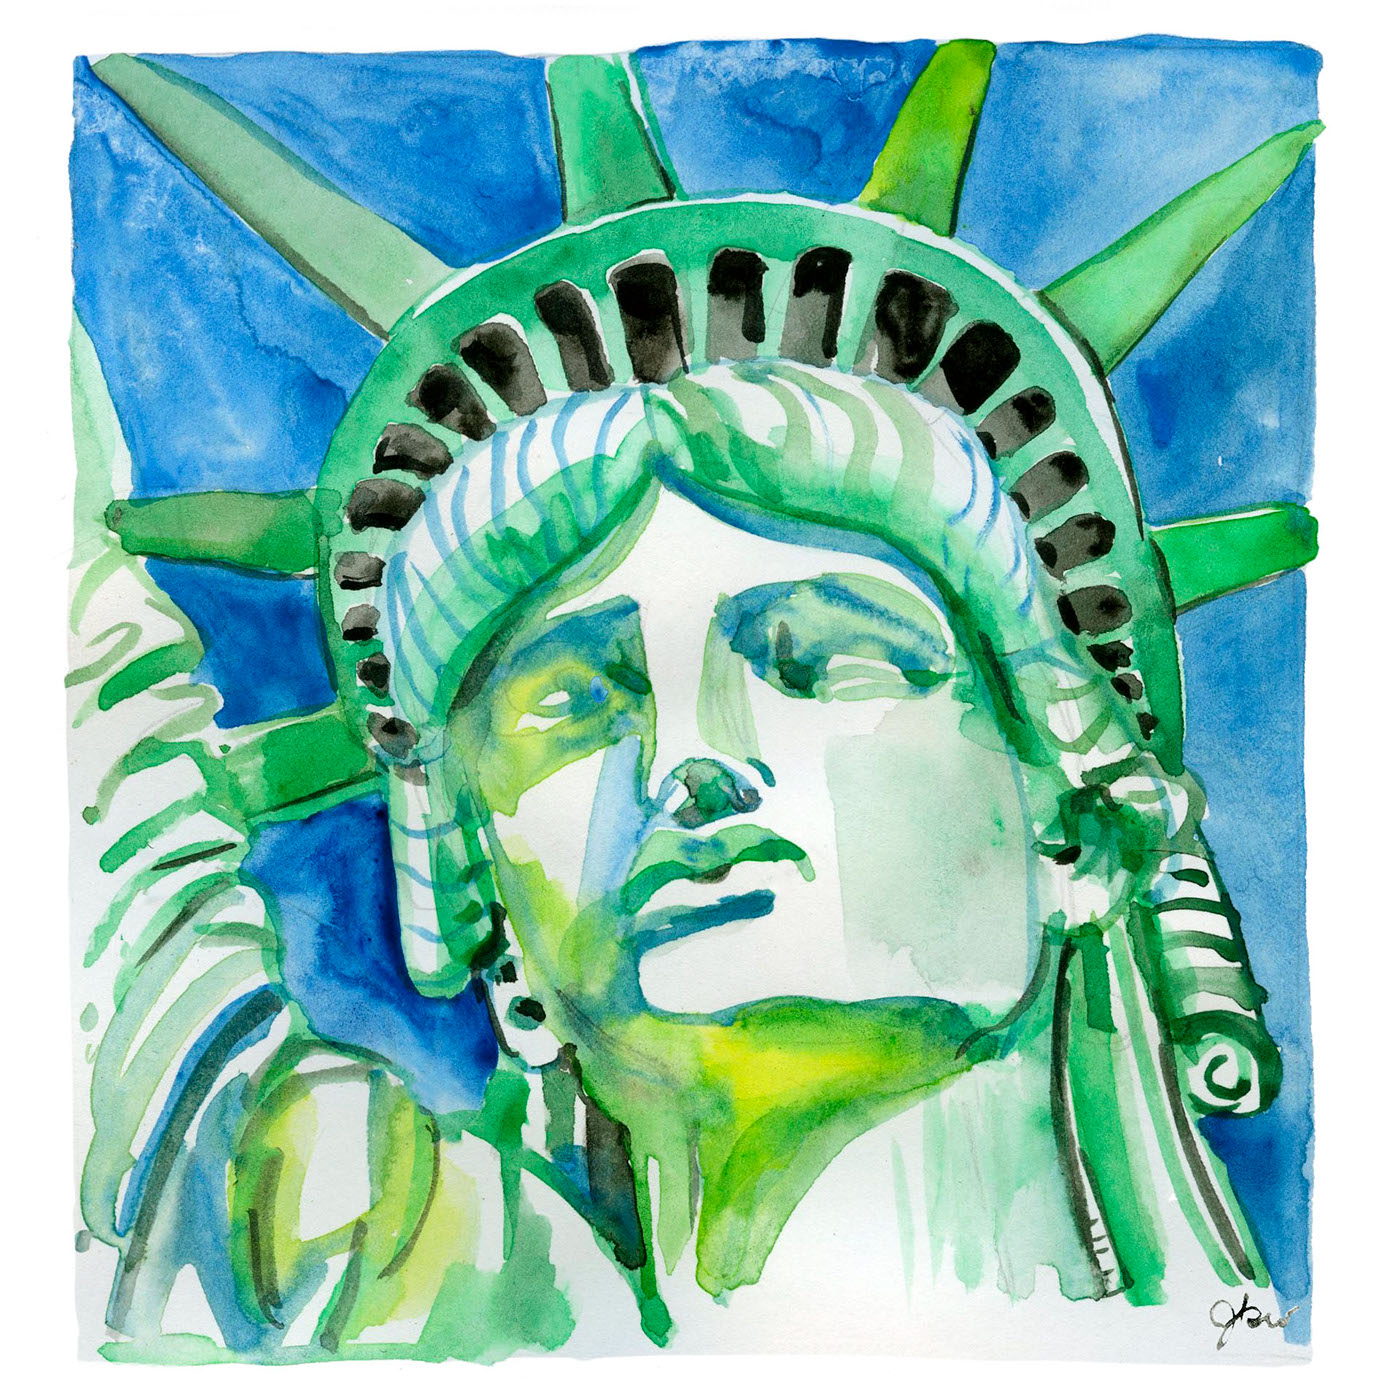 lady liberty protest art statue of liberty immigrant rights Political Art feminist art watercolor portrait American in Paris